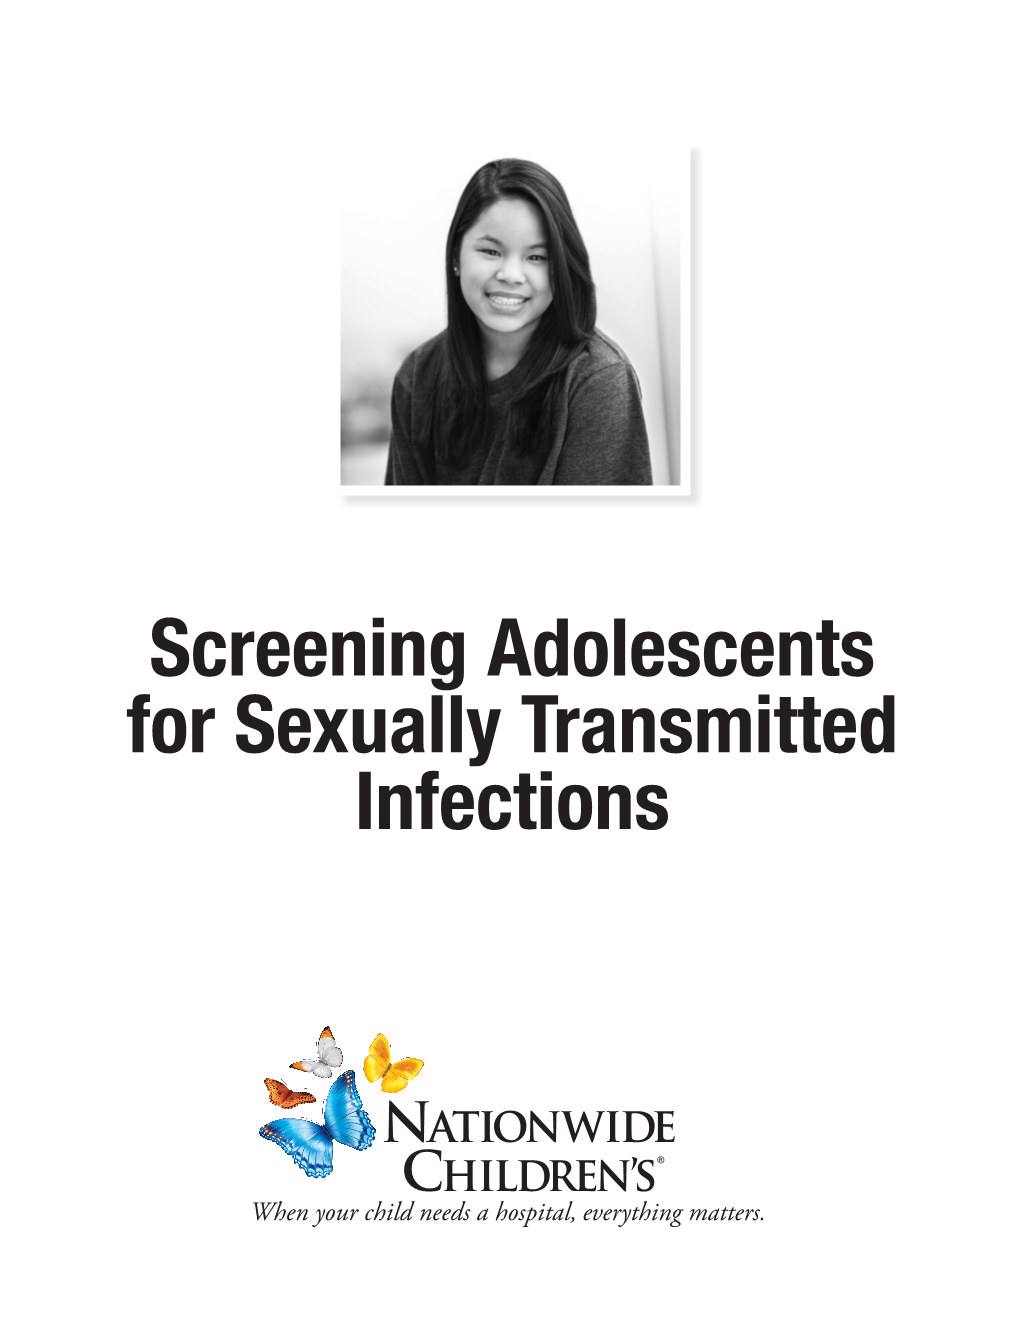 Screening Adolescents for Sexually Transmitted Infections Sexual Activity in Adolescents SEXUAL INTERCOURSE AMONG YOUNG PEOPLE in the U.S